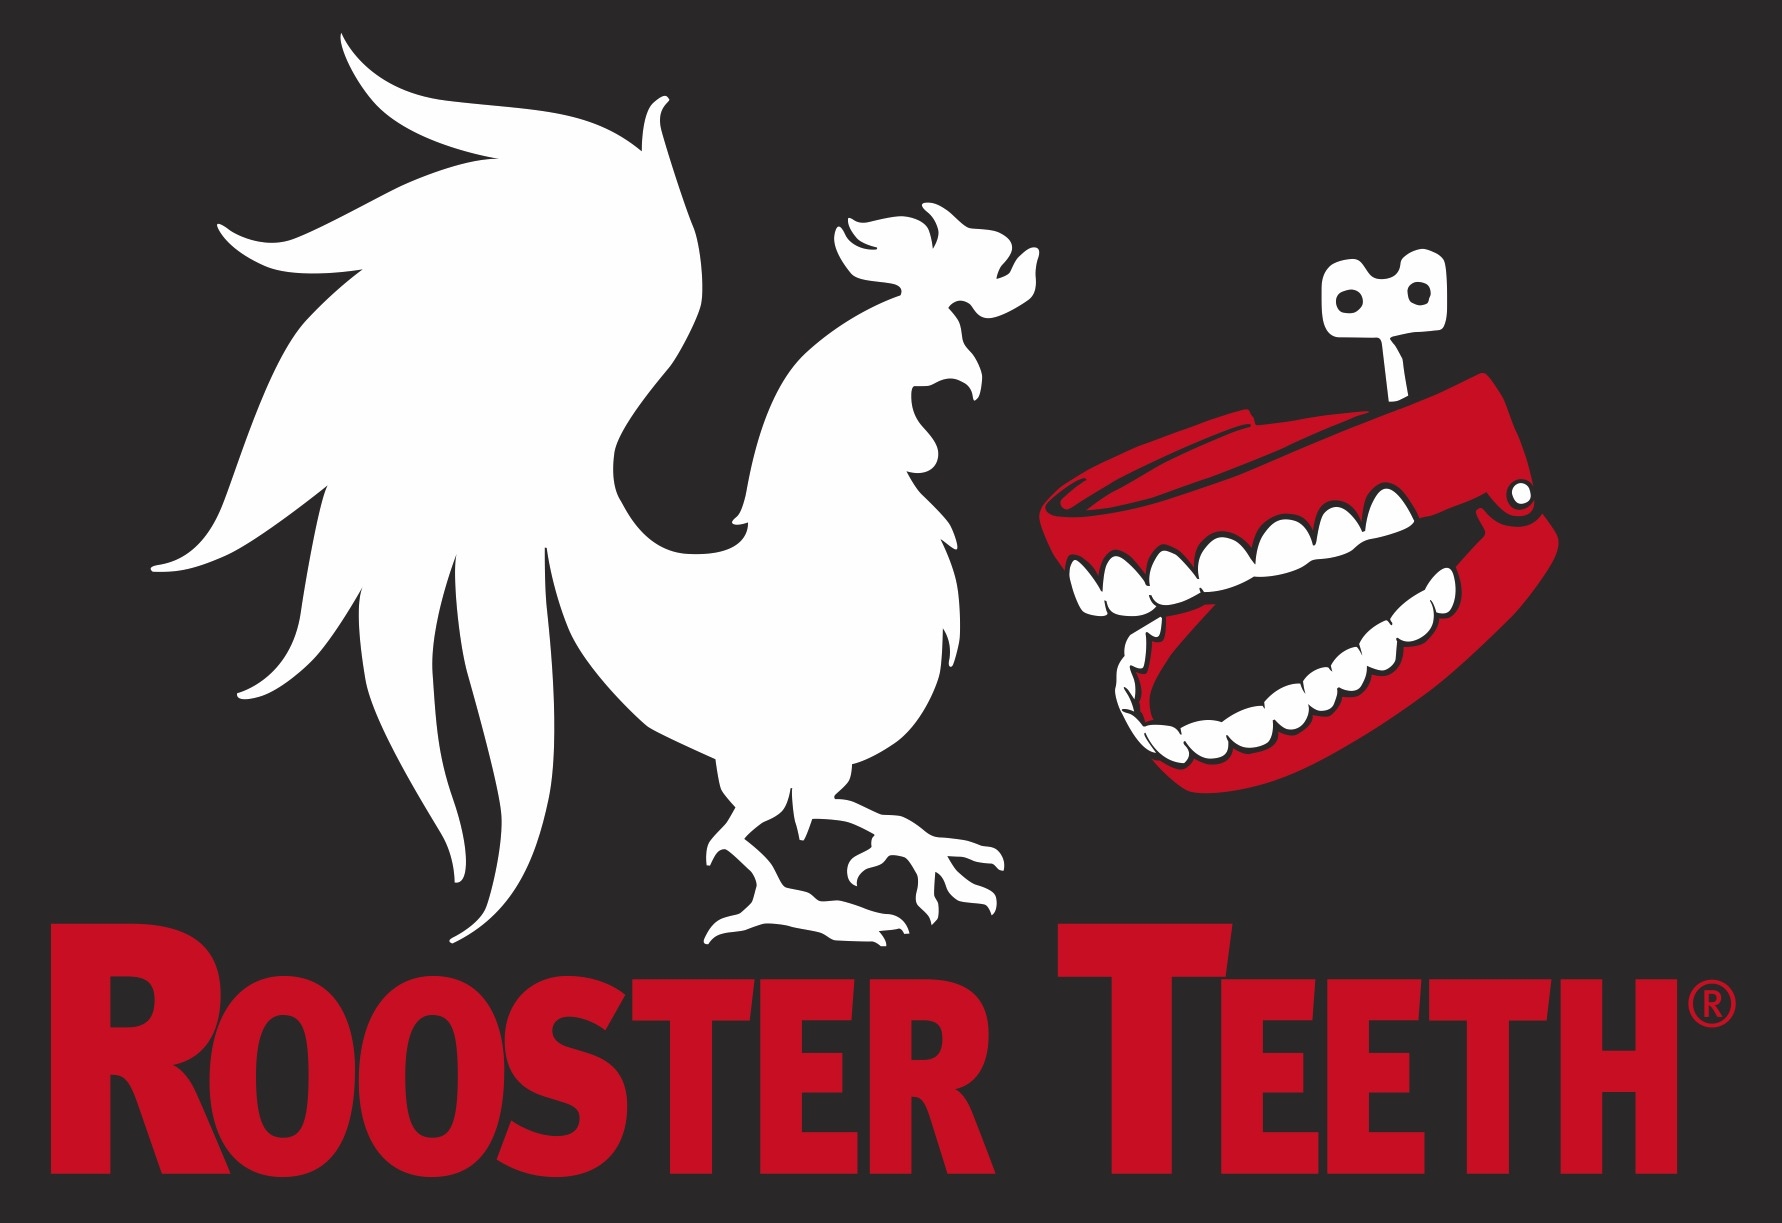 Rooster Teeth Productions logo